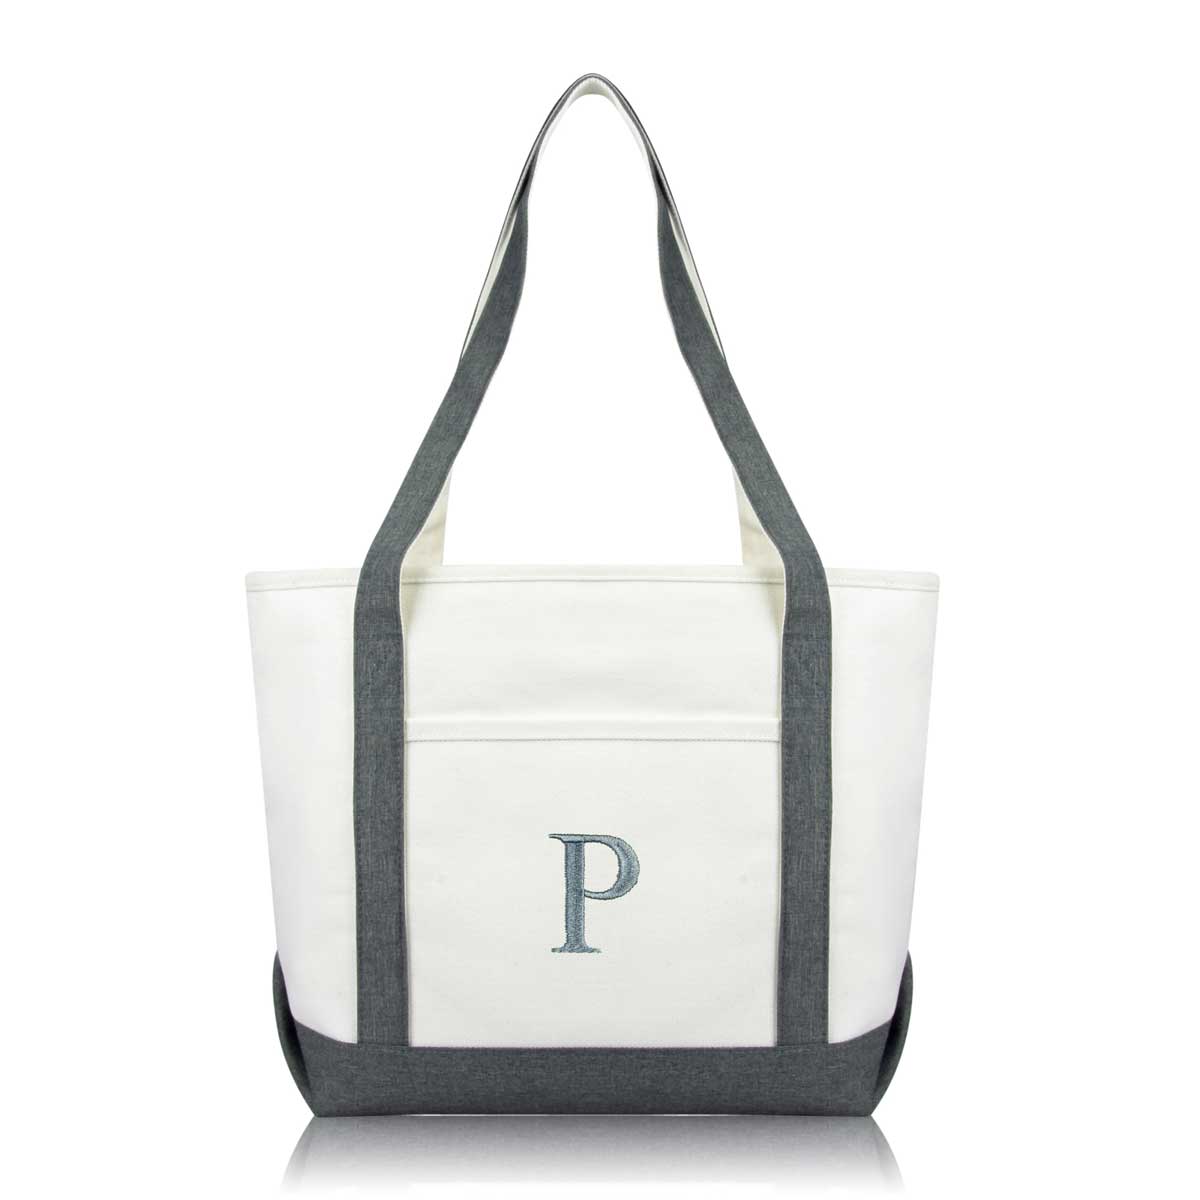 Dalix Medium Personalized Tote Bag Monogrammed Initial Letter - P Gray